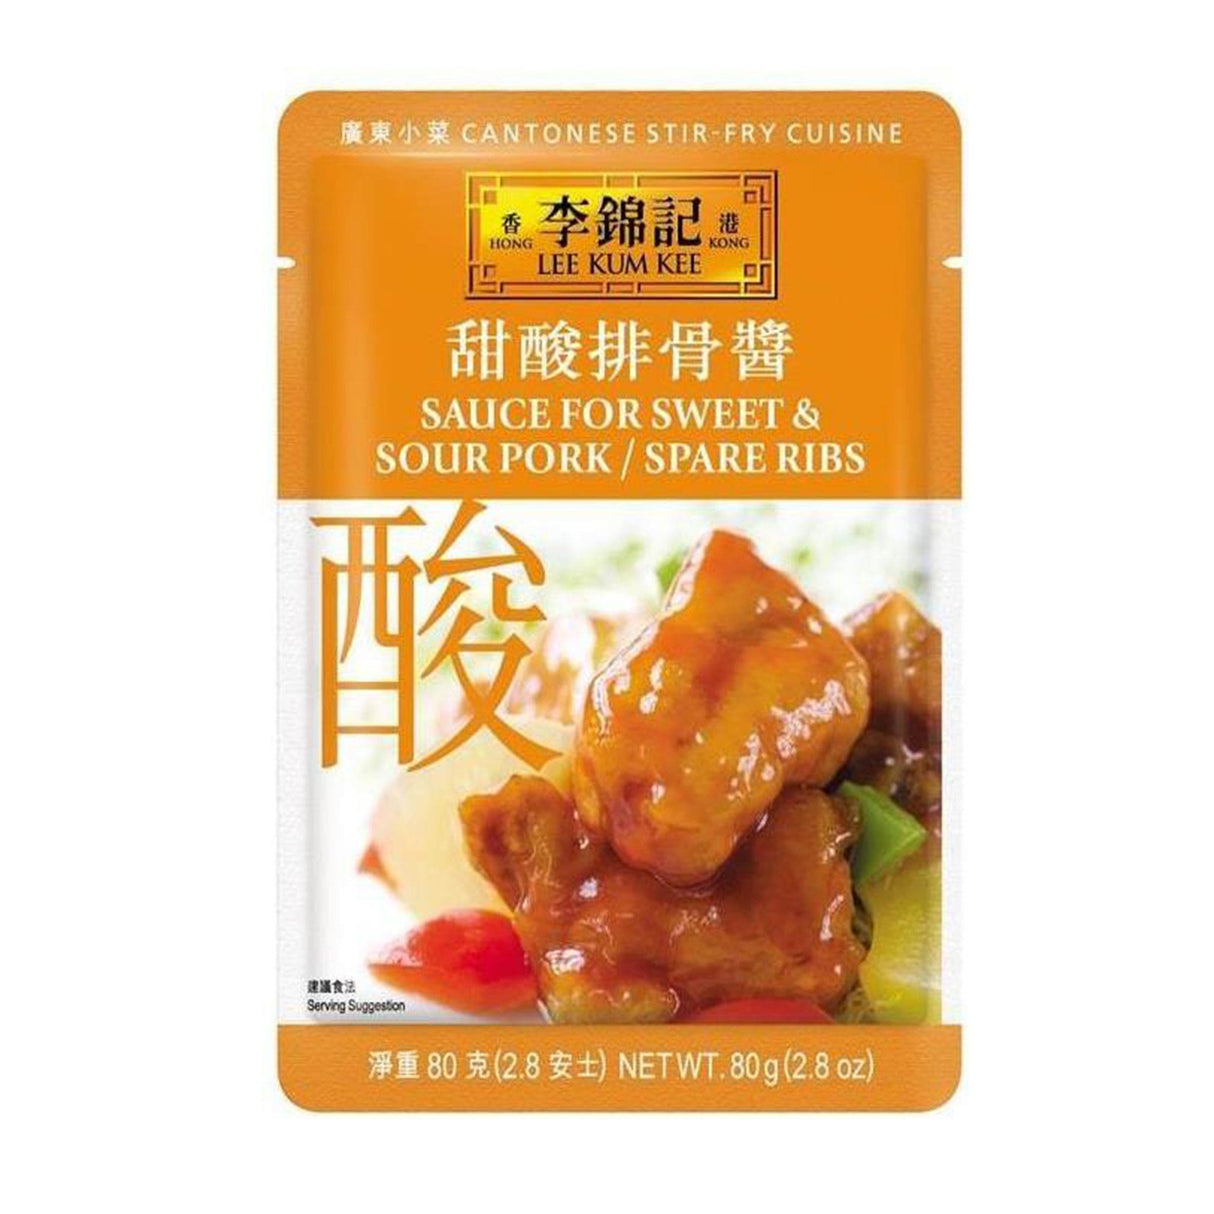 Lee Kum Kee Sauce For Sweet & Sour Pork-Spare Ribs